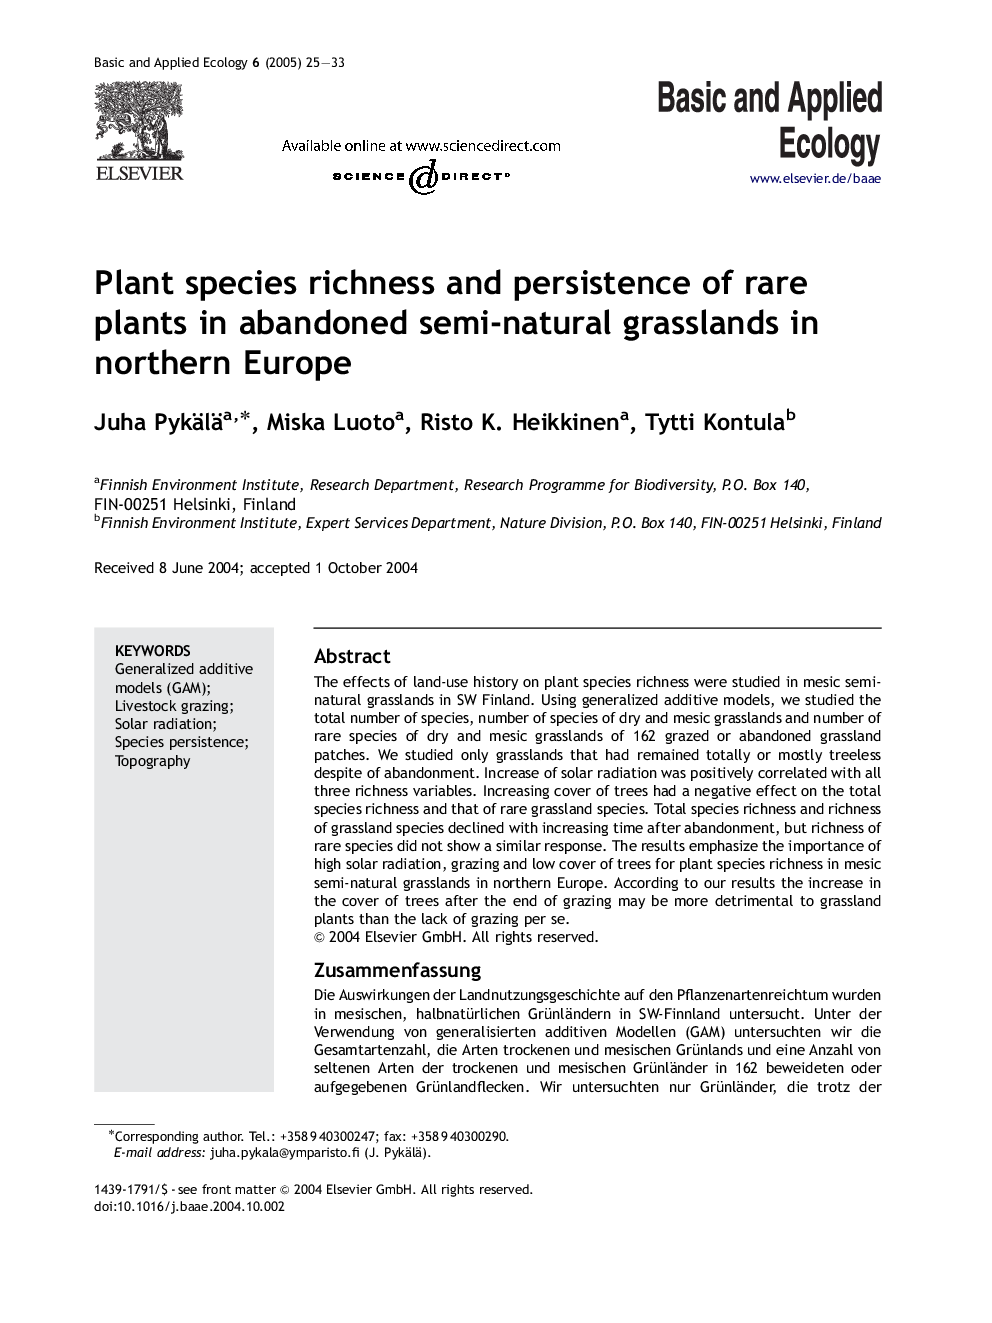 Plant species richness and persistence of rare plants in abandoned semi-natural grasslands in northern Europe